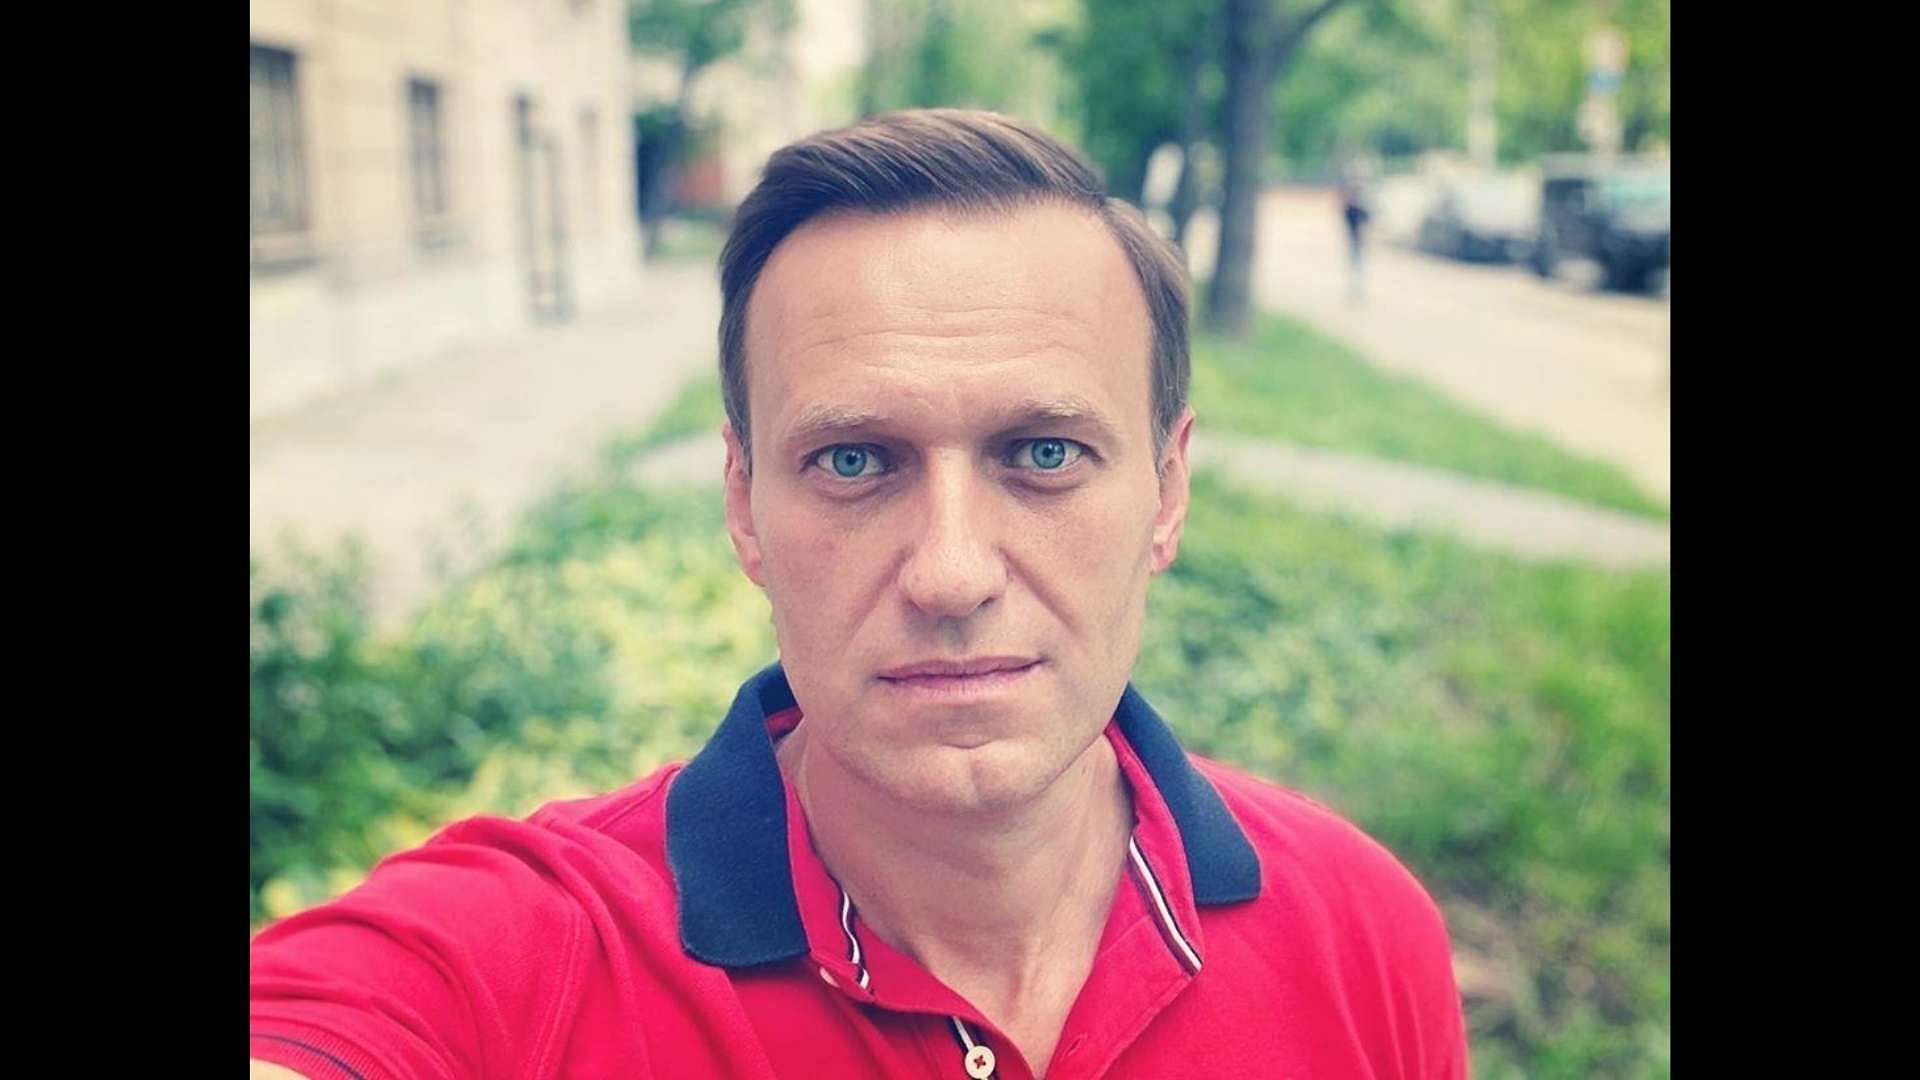 Alexei Navalny, a 44-year-old staunch critic of President Vladimir Putin, was on a ventilator and in a coma.